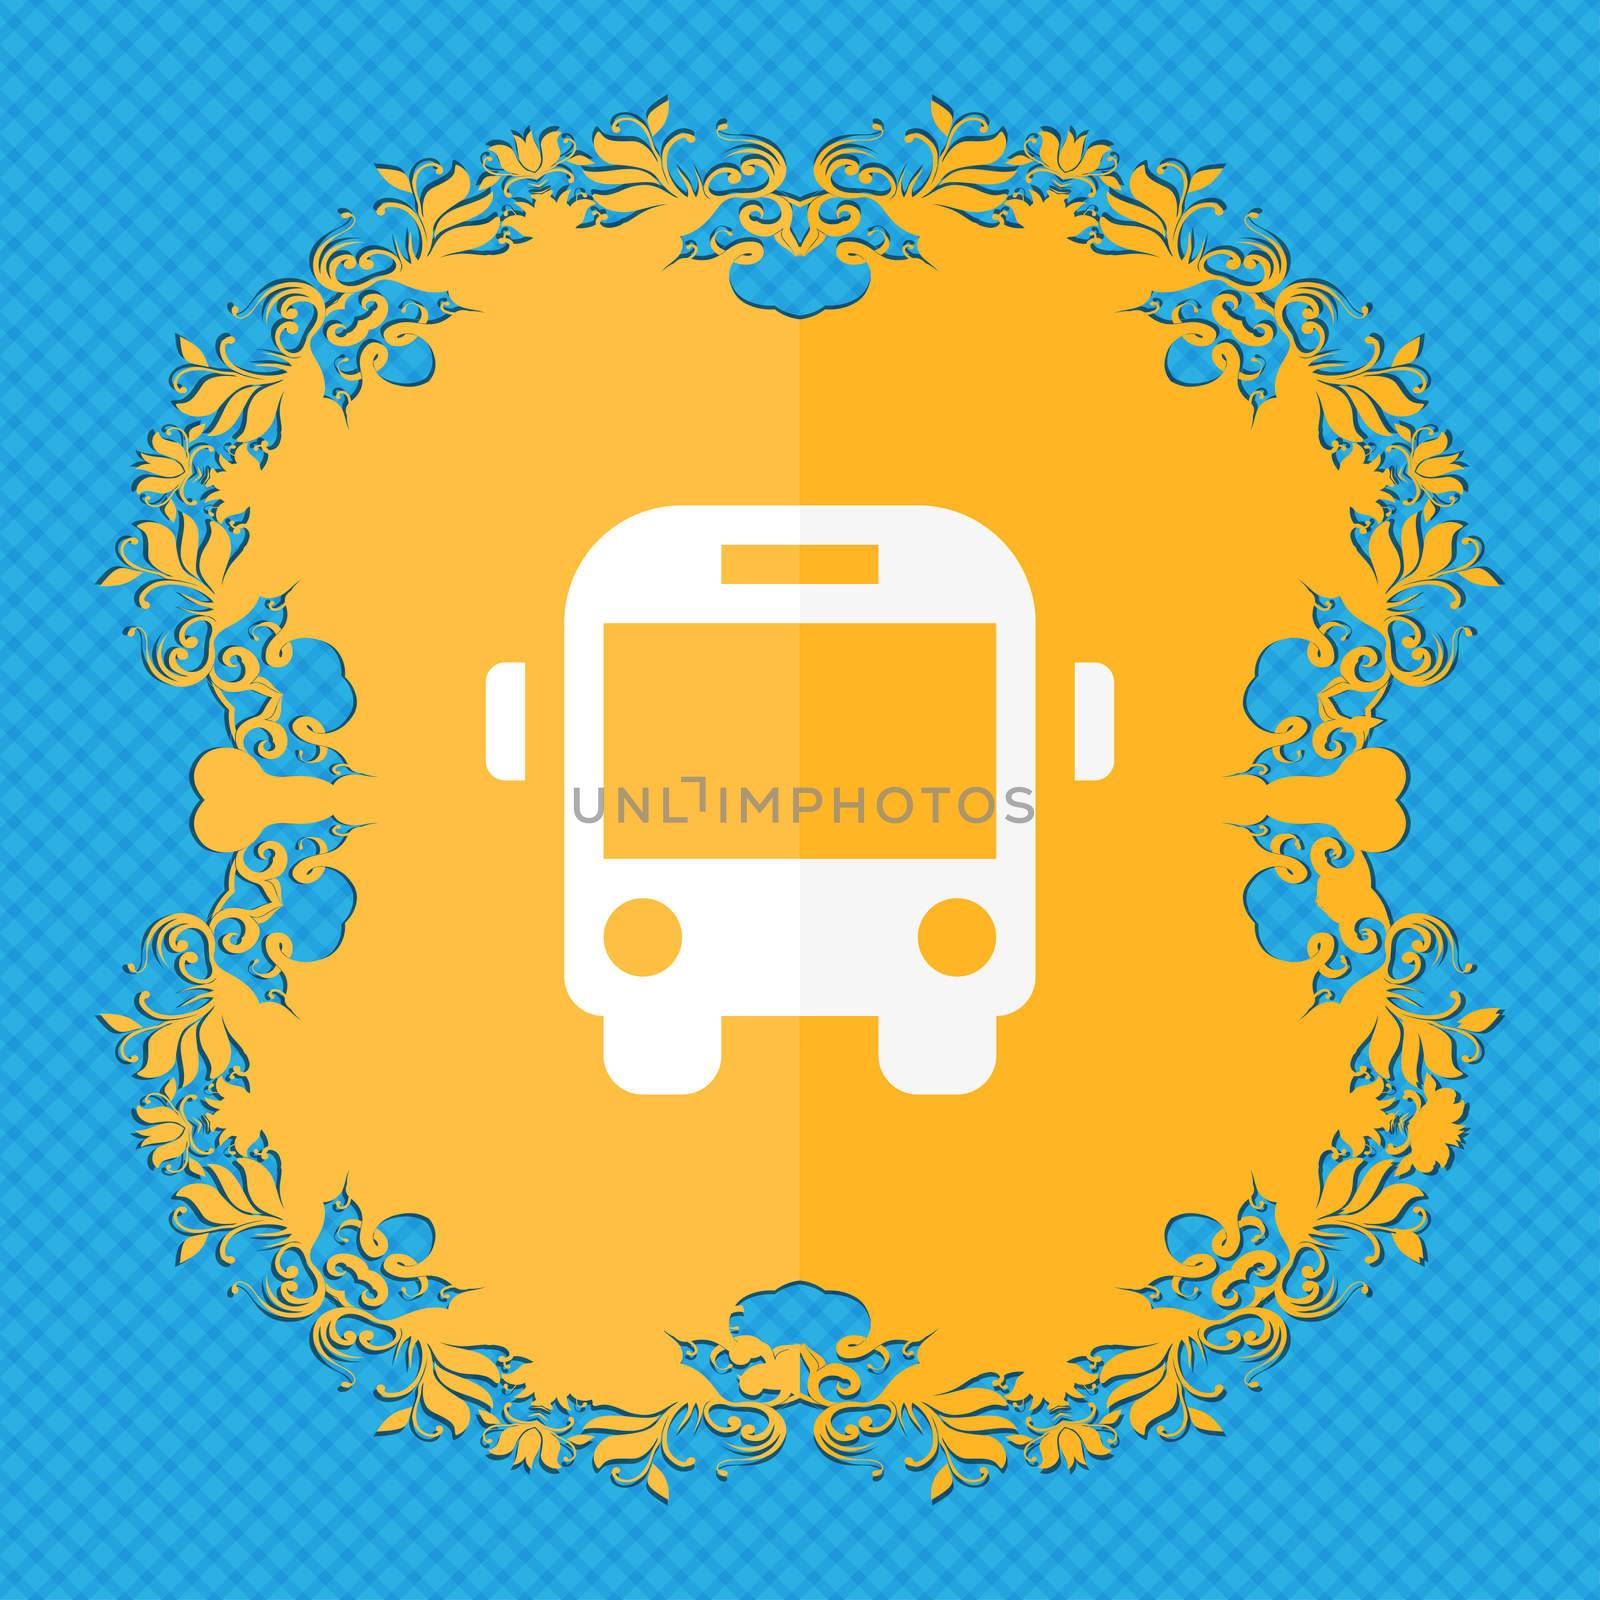 Bus . Floral flat design on a blue abstract background with place for your text.  by serhii_lohvyniuk